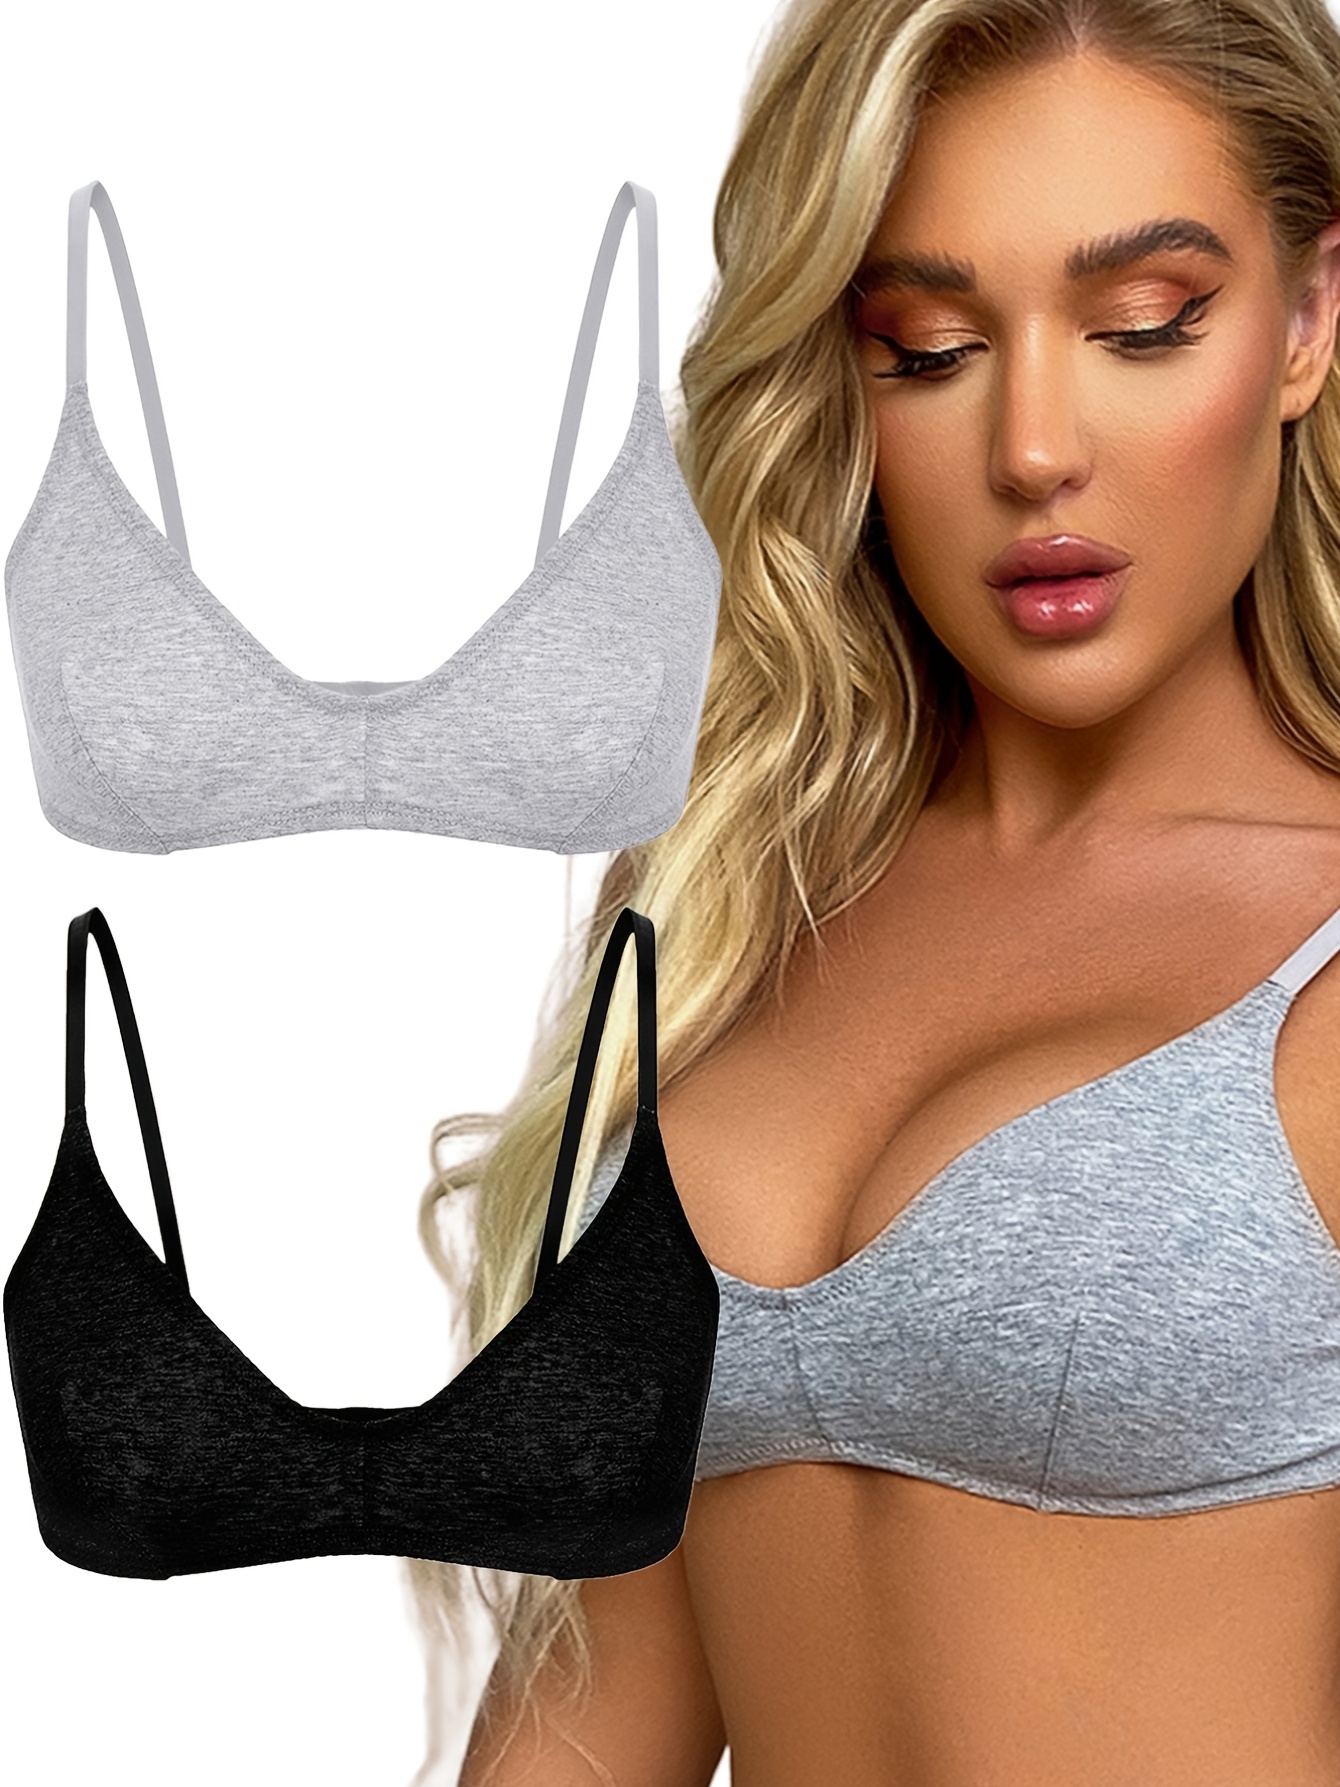 INTIMA French Triangle Lace Bra Set For Women Wireless Push Up Underwear Ultra  Thin Cup Seamless Bralette Lingerie Deep V Breasts Show Small Bra and  Panties Set